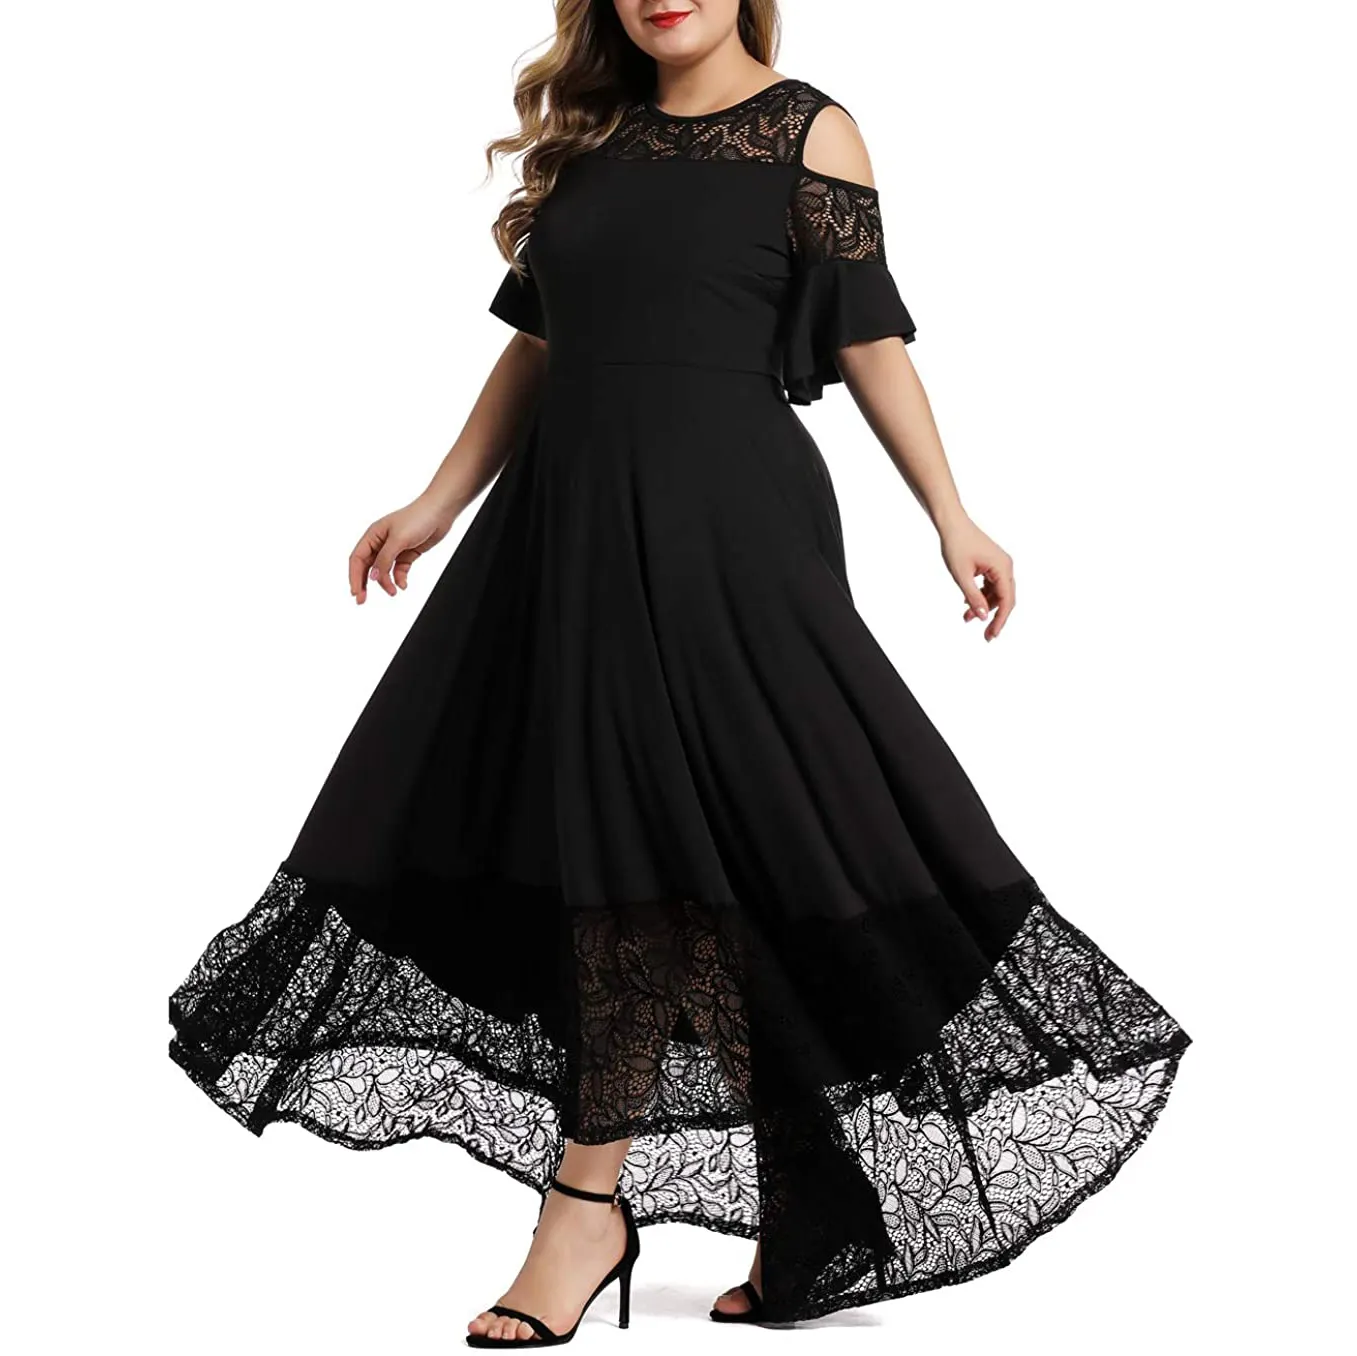 Custom Women Clothing Classic Plus Size Black Lace Lady Elegant Casual Long Cocktail Formal Evening Summer Party Dress For Daily